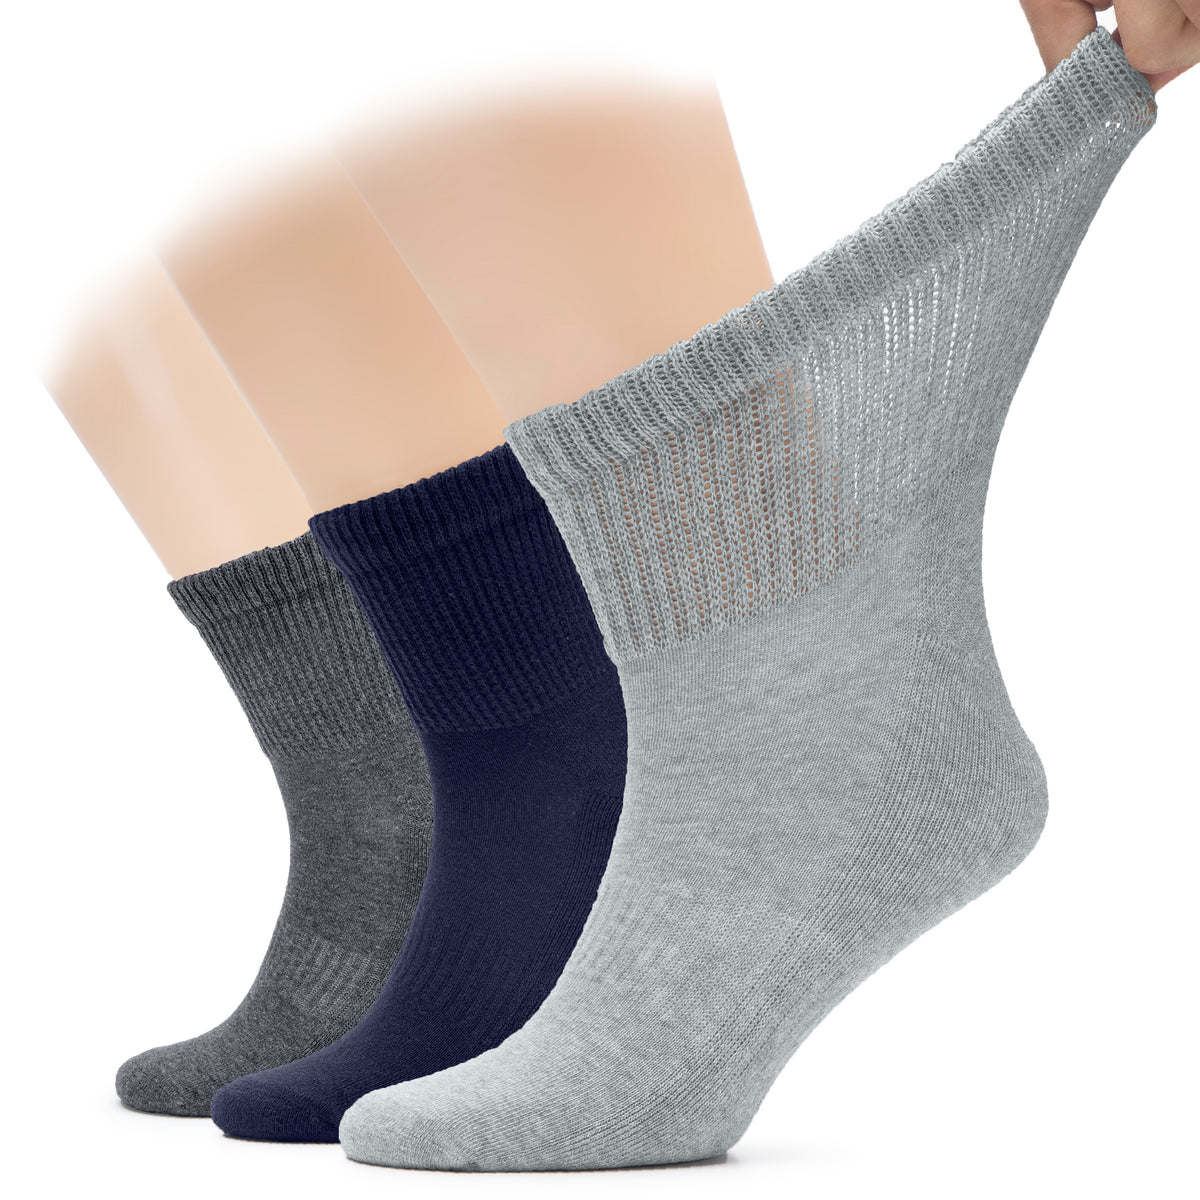 Three pairs of Men's Diabetic Ankle Socks, including one blue and one grey pair, designed for comfort and support.